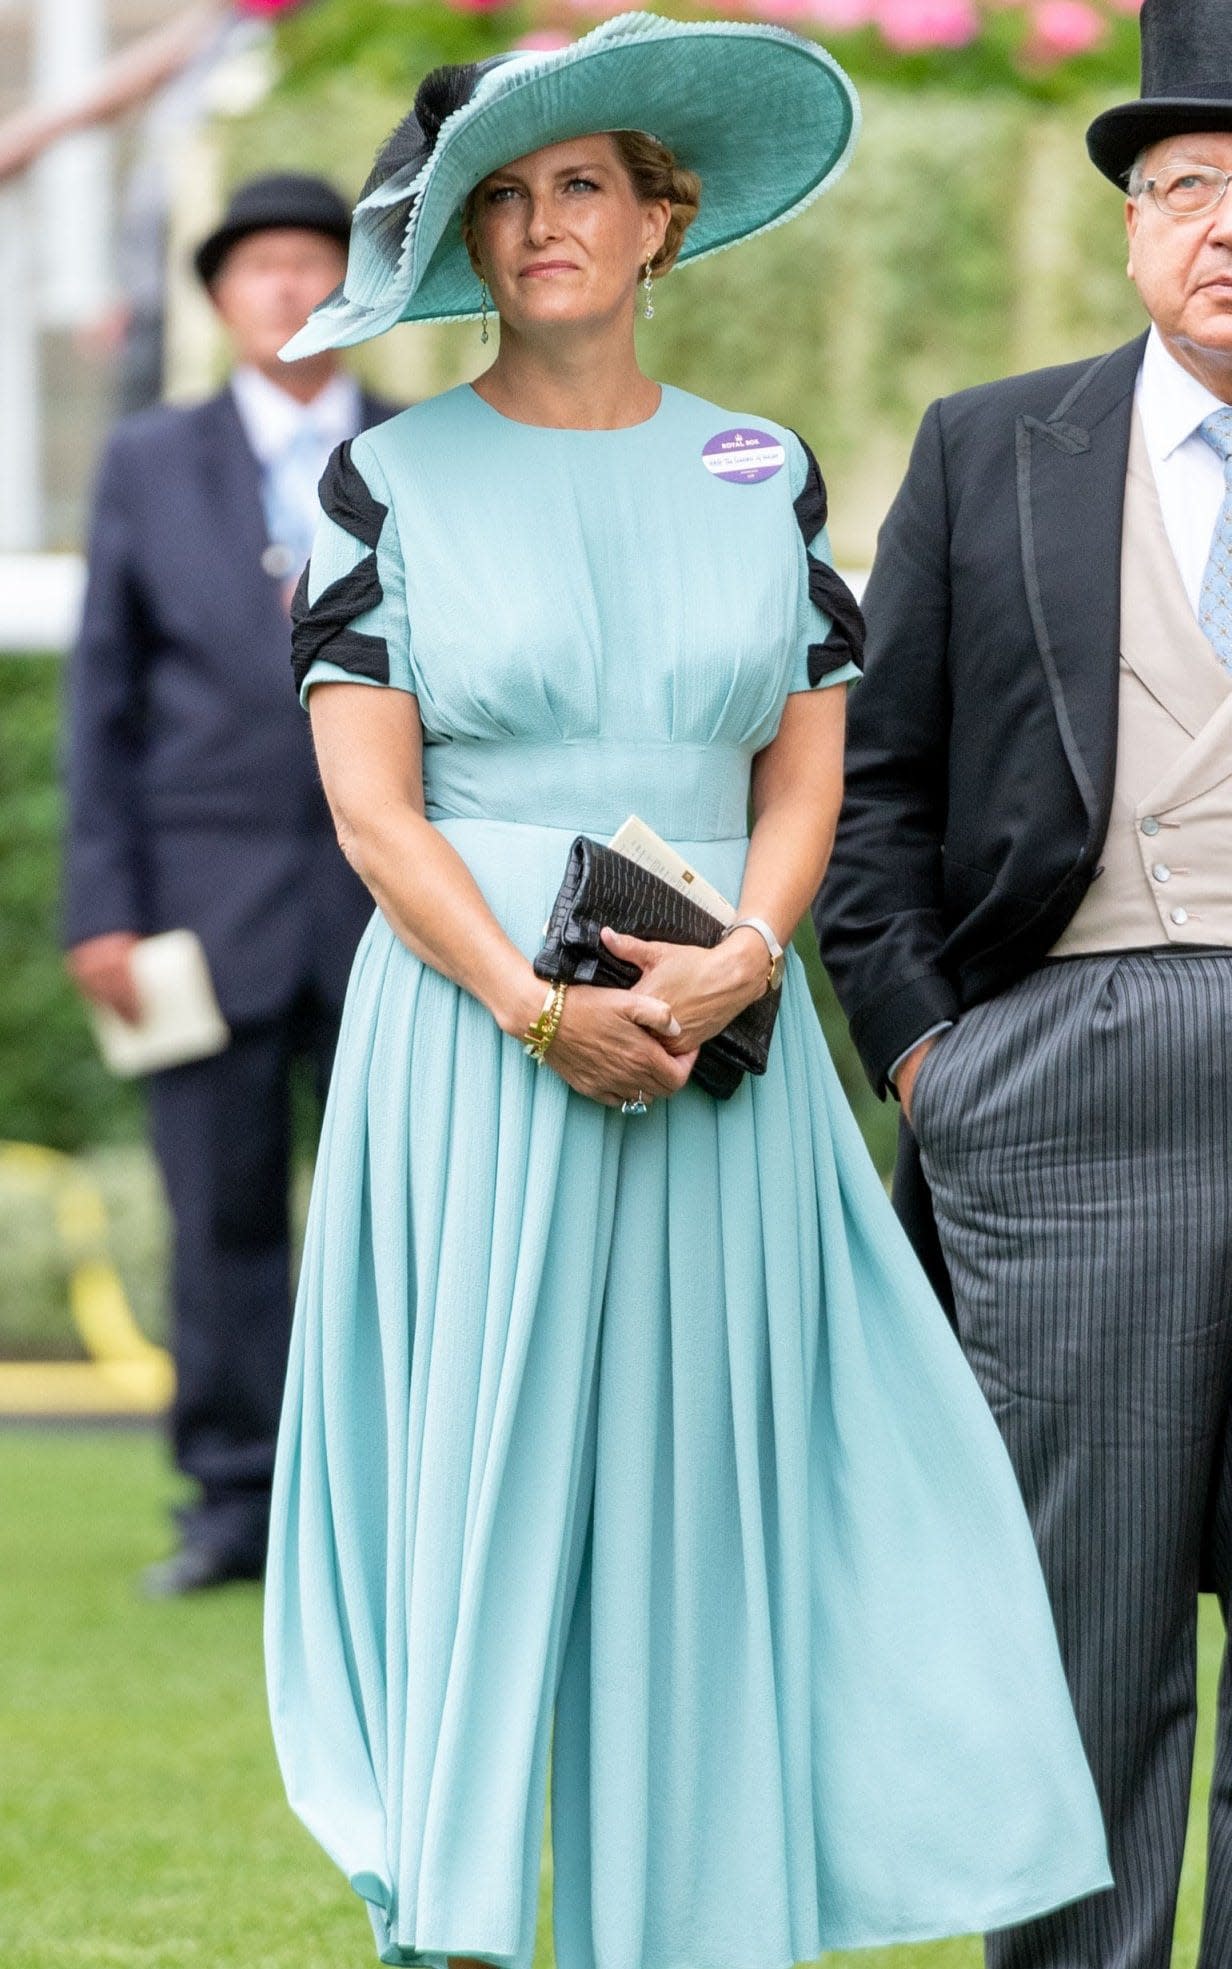 Sophie, Countess of Wessex wearing a jumpsuit to Royal Ascot on Wednesday - UK Press